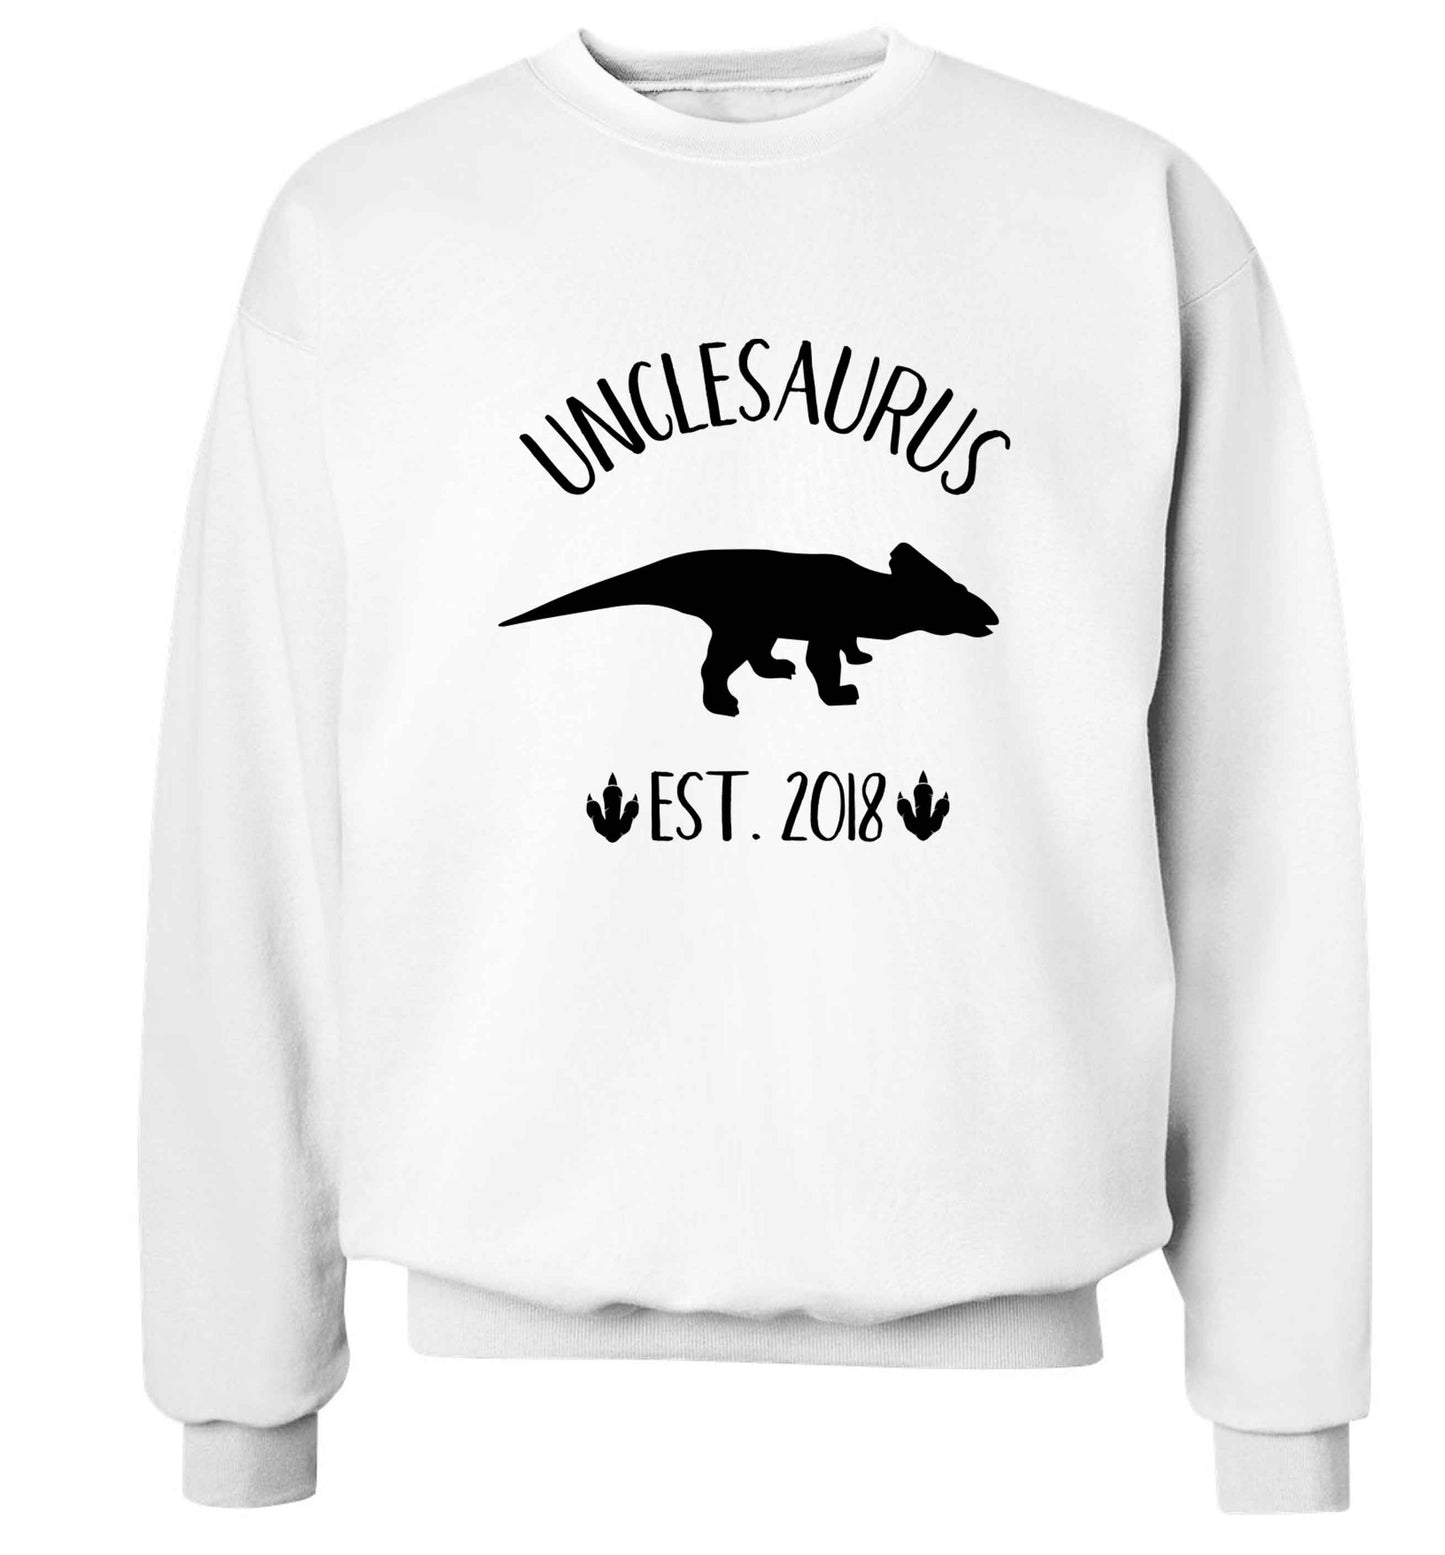 Personalised unclesaurus since (custom date) Adult's unisex white Sweater 2XL